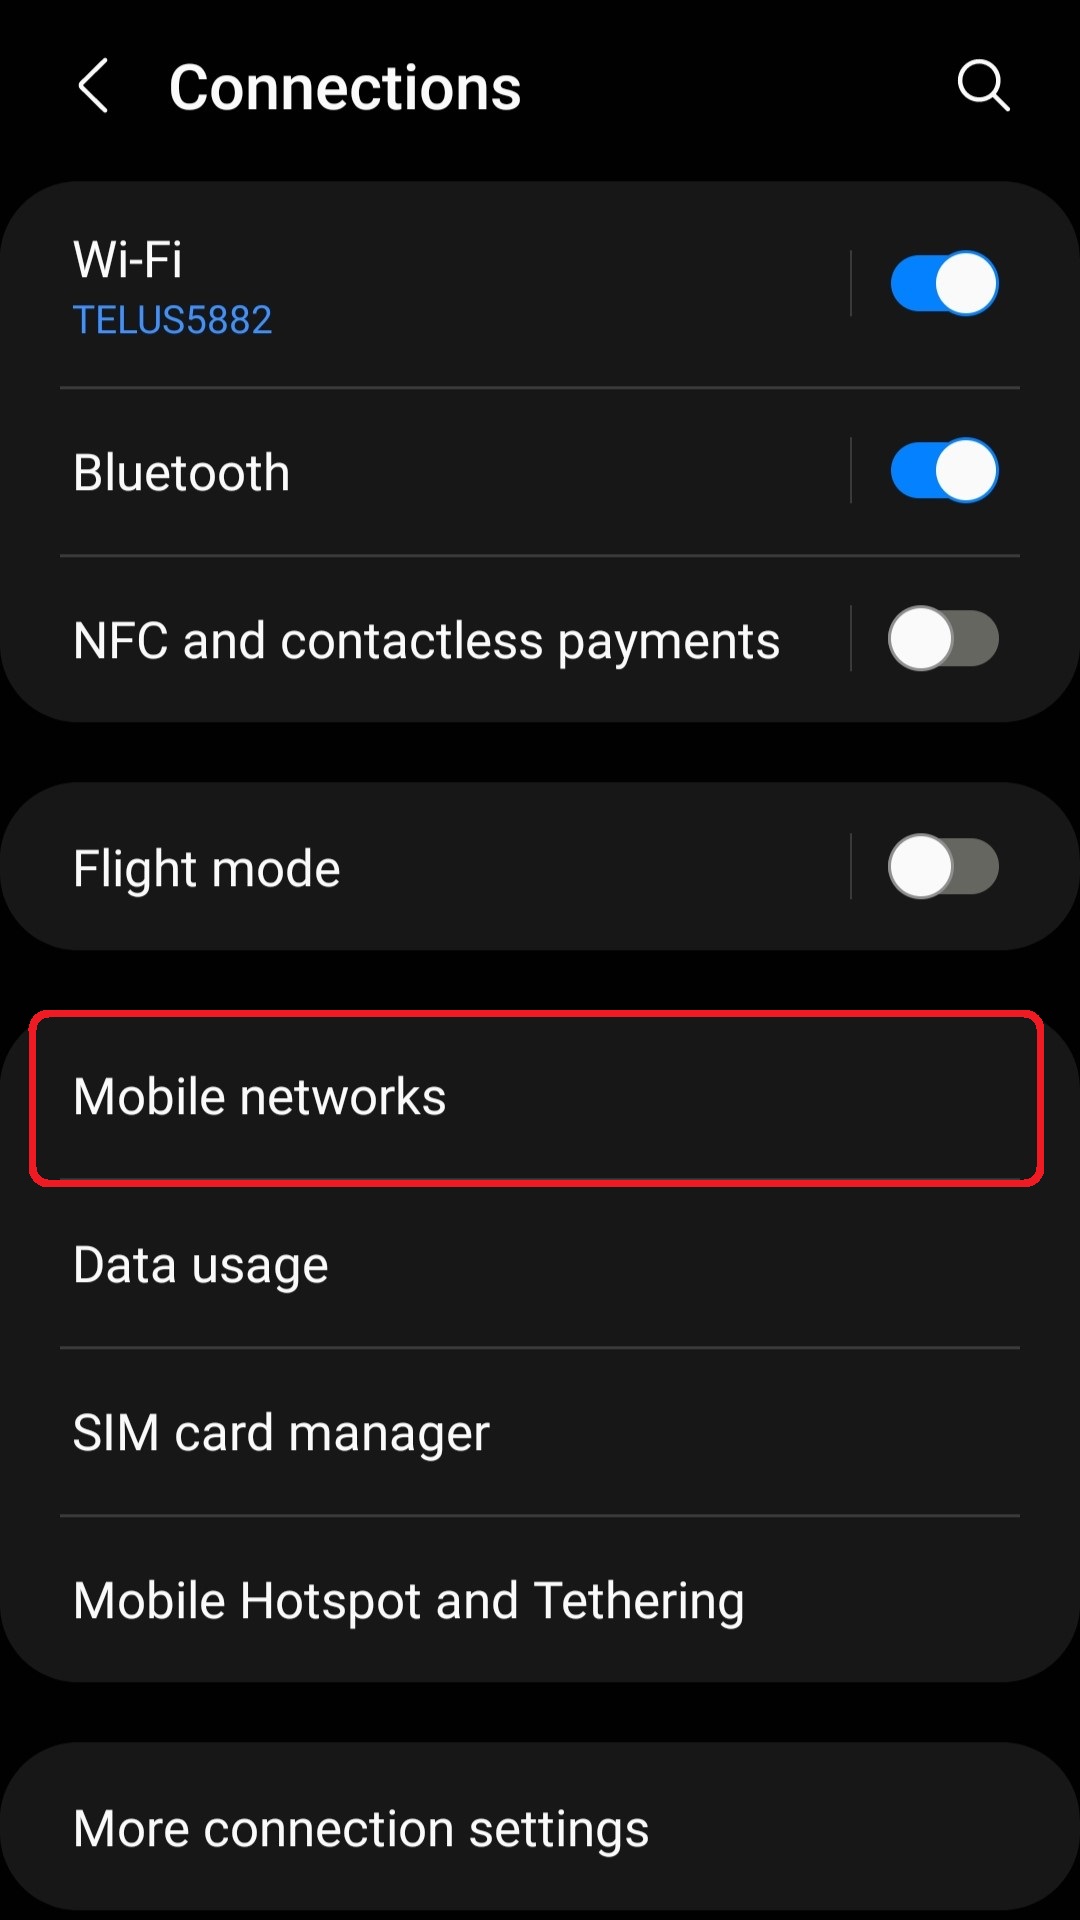 Mobile network connections